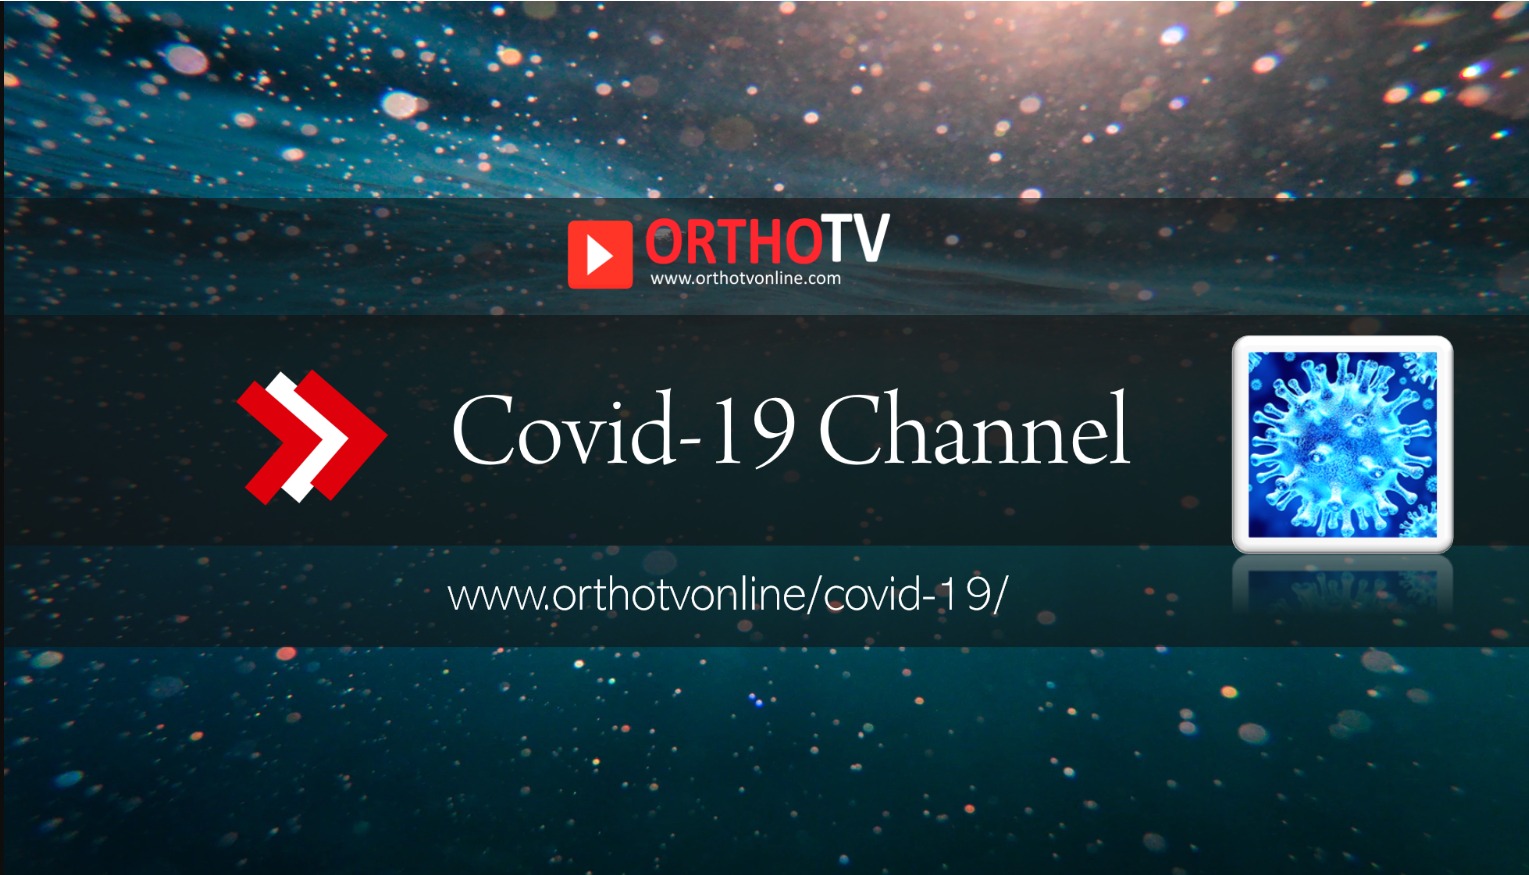 OrthoTV Covid channel